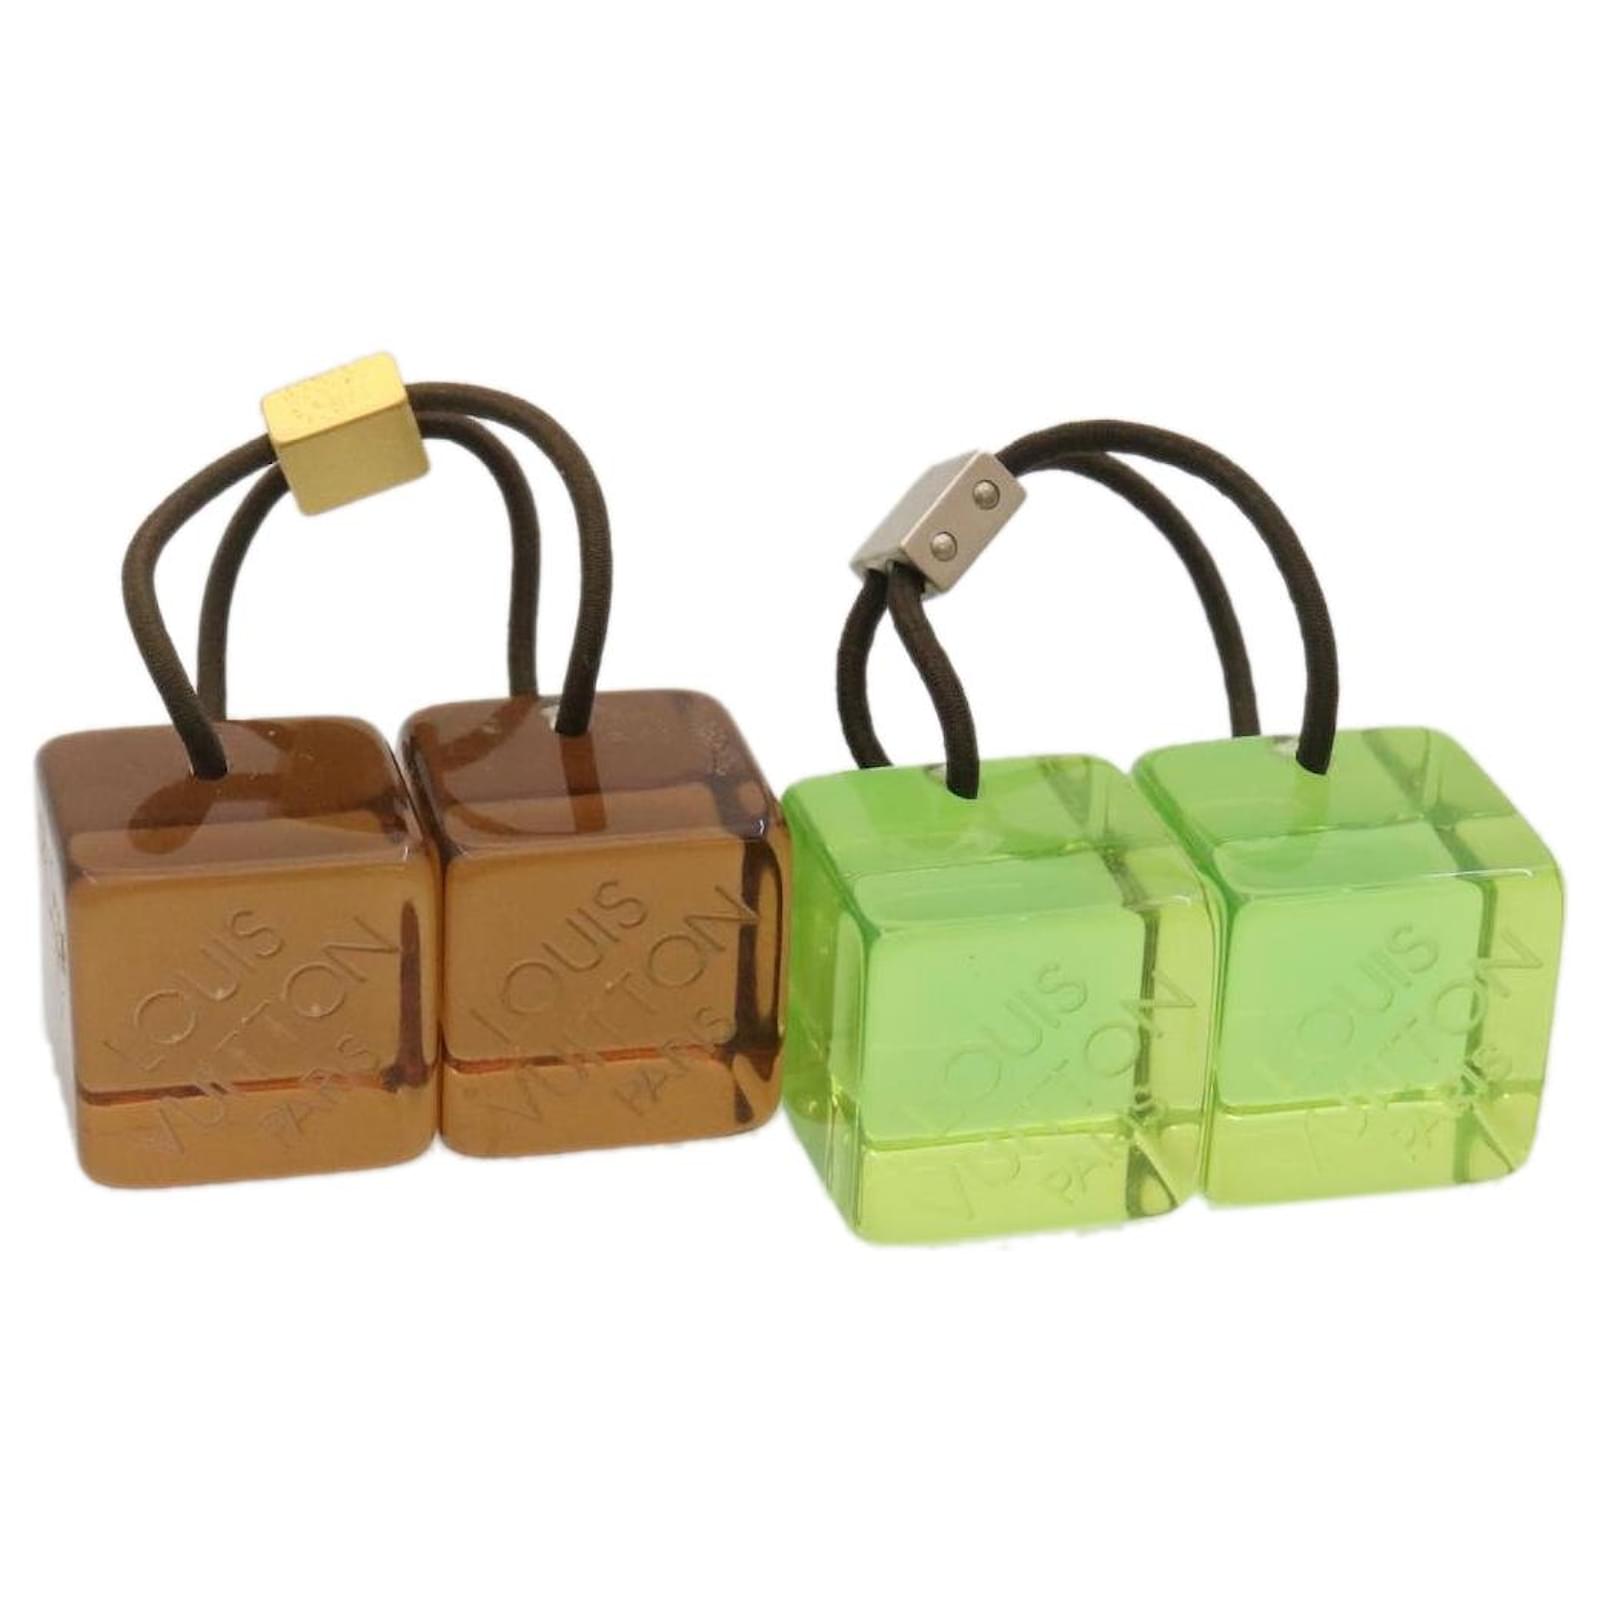 Louis Vuitton Hair Tie Cube Set of 2 Used From Japan  eBay